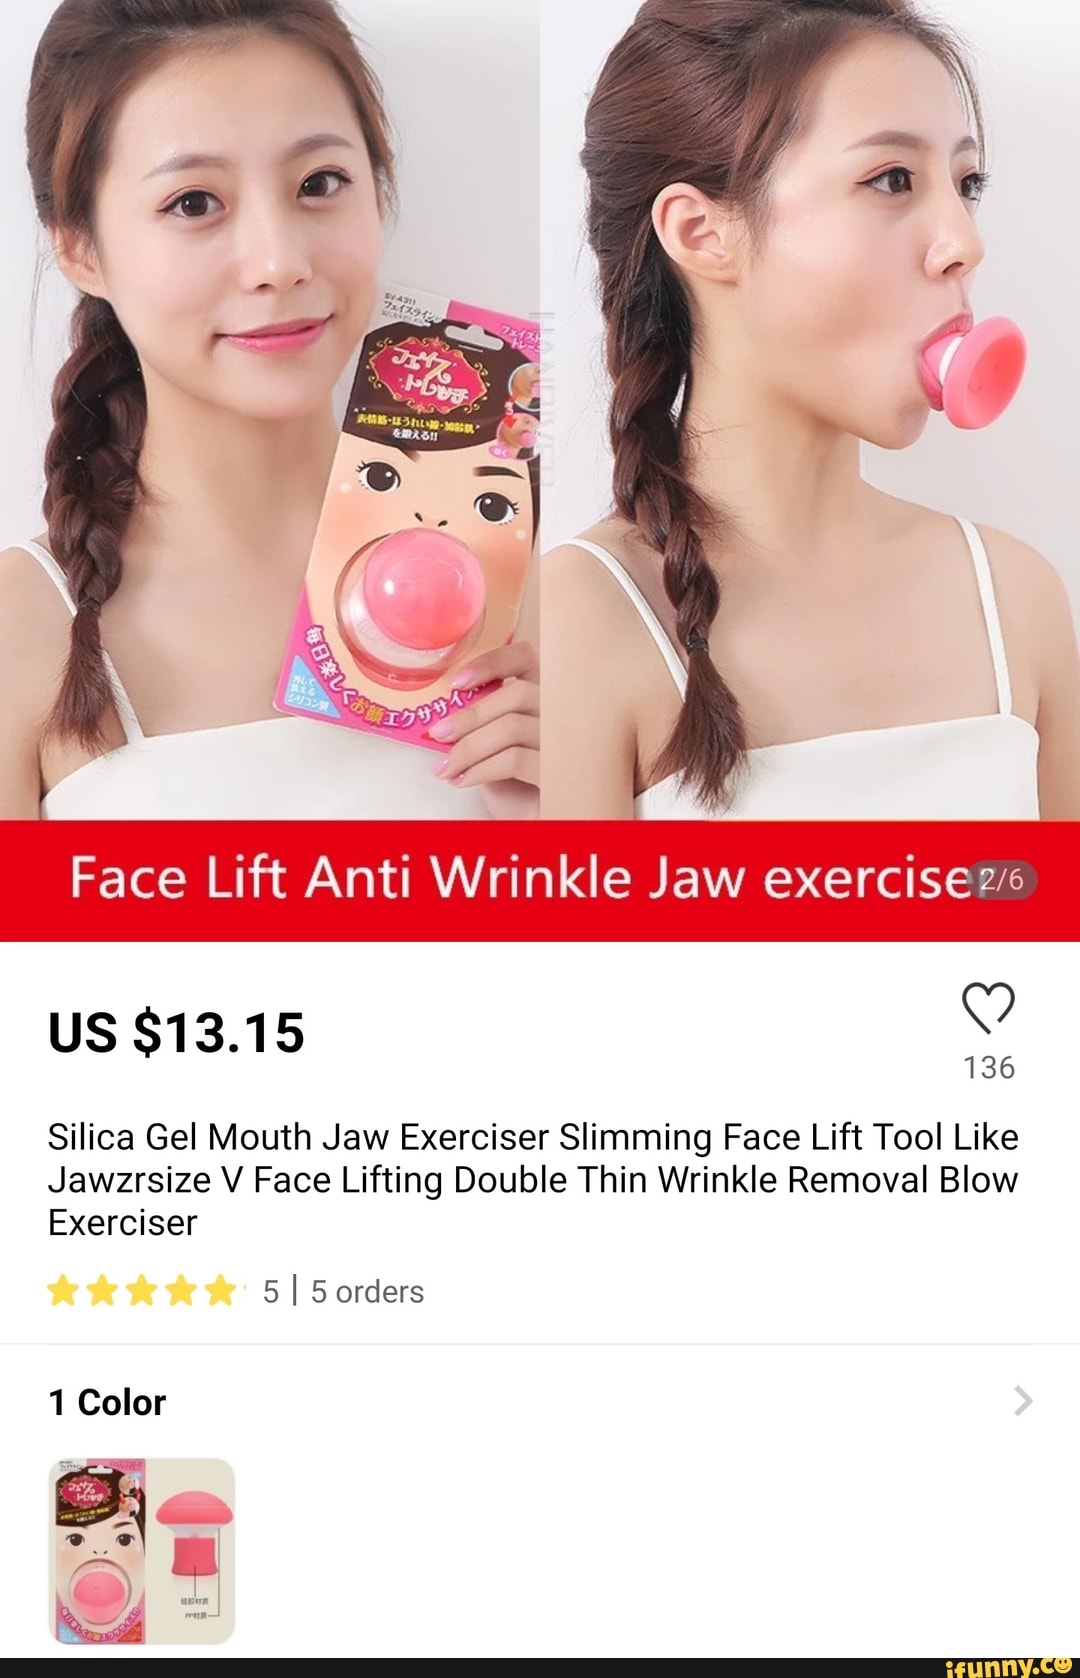 Jawzrsize Pop 'N Go Jaw, Face, and Neck Exerciser - Define Your Jawline,  Slim and Tone Your Face, Look Younger and Healthier - Helps Reduce Stress  and